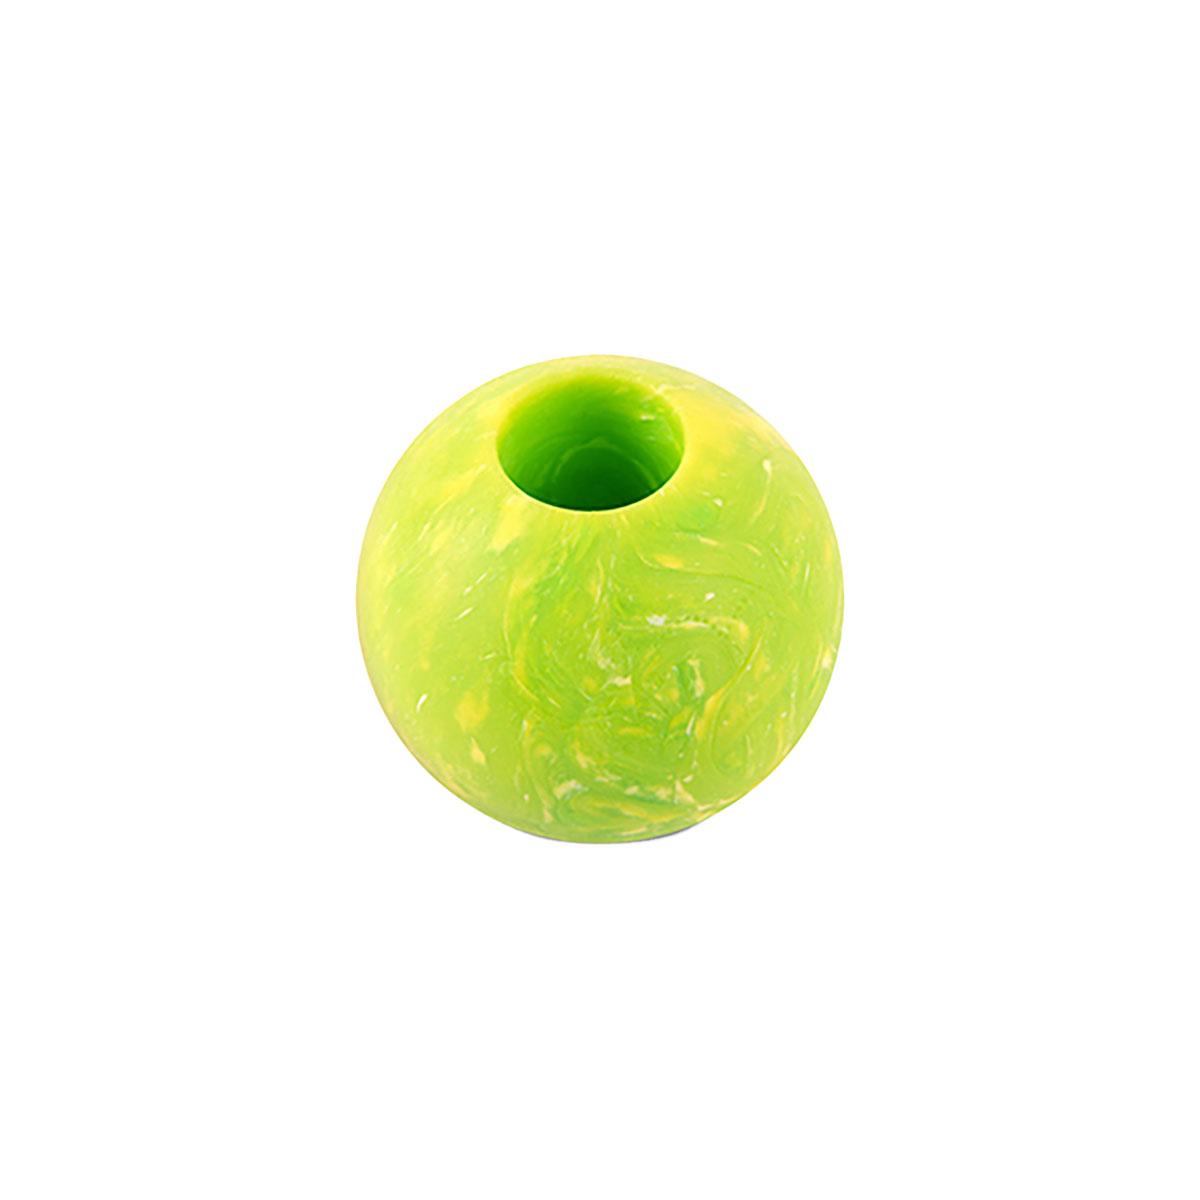 P.L.A.Y. ZoomieRex IncrediBall Dog Toy - Green